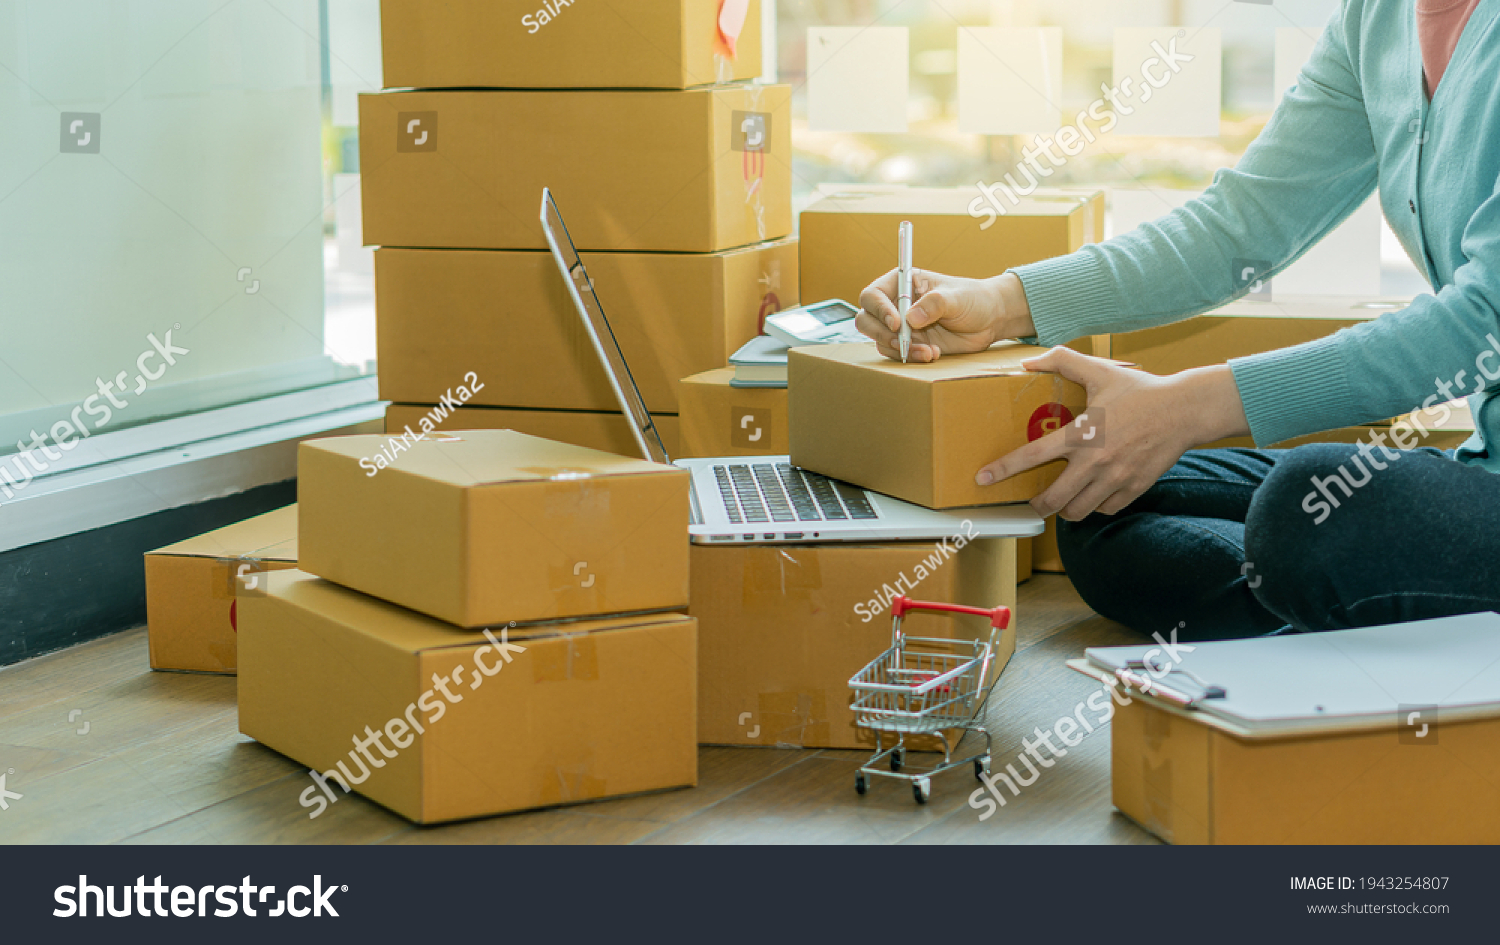 Startup Entrepreneurship Small Business SME Freelance Young lady working at home with boxes on the floor and laptop online Marketing Packaging SME Shipping Ecommerce Concepts #1943254807